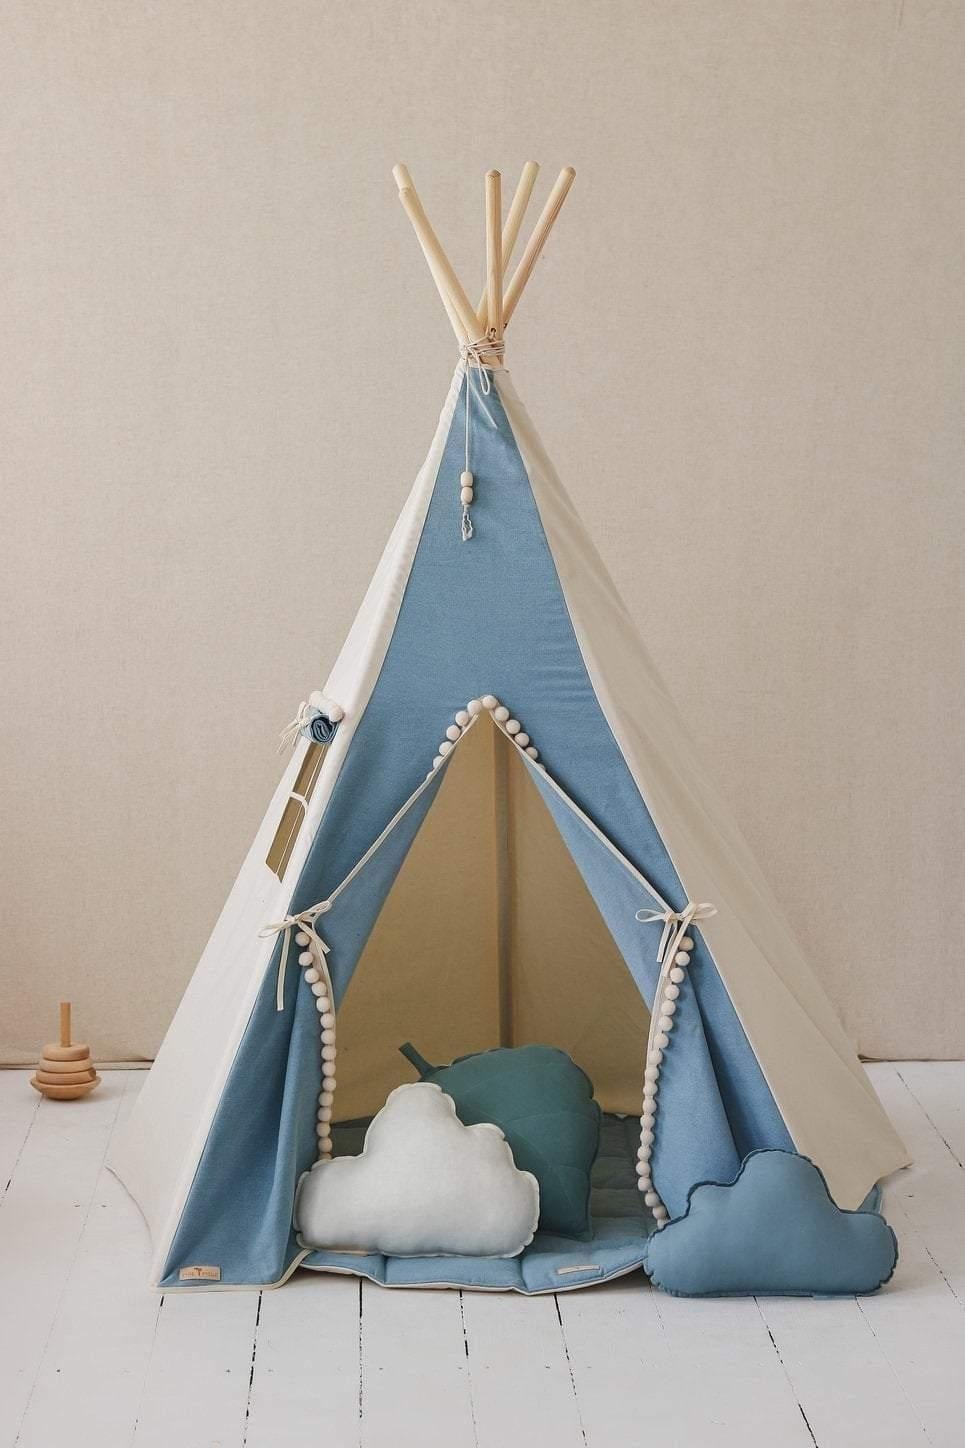 moimili.us Set teepee with mat Moi Mili “Jeans” Teepee with Pompoms and Round Mat Set